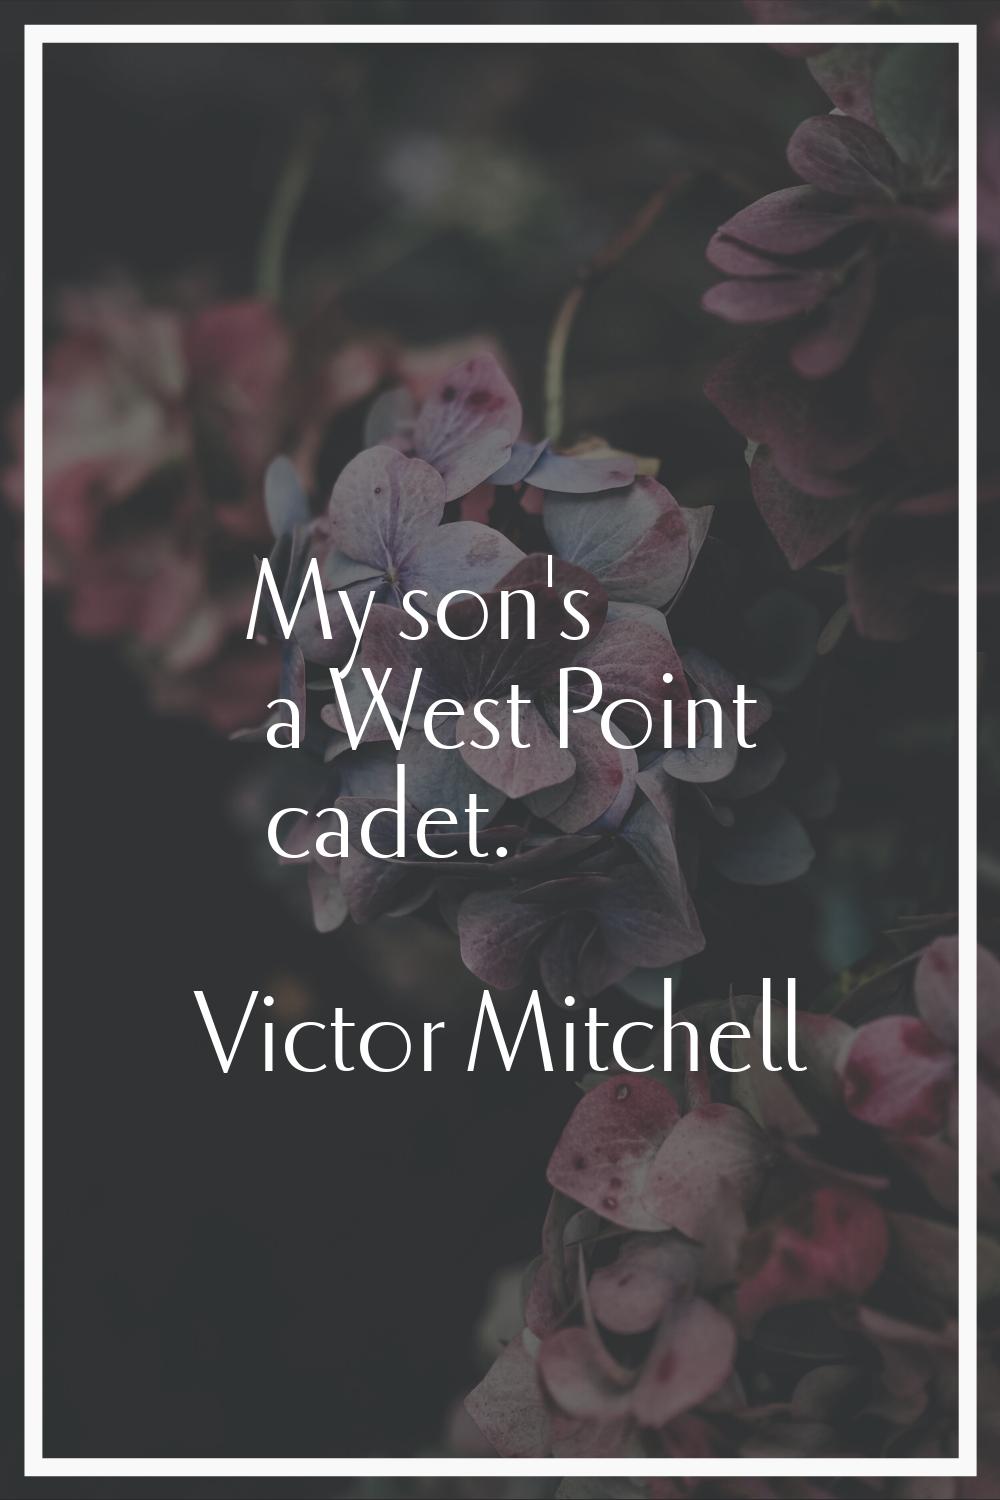 My son's a West Point cadet.